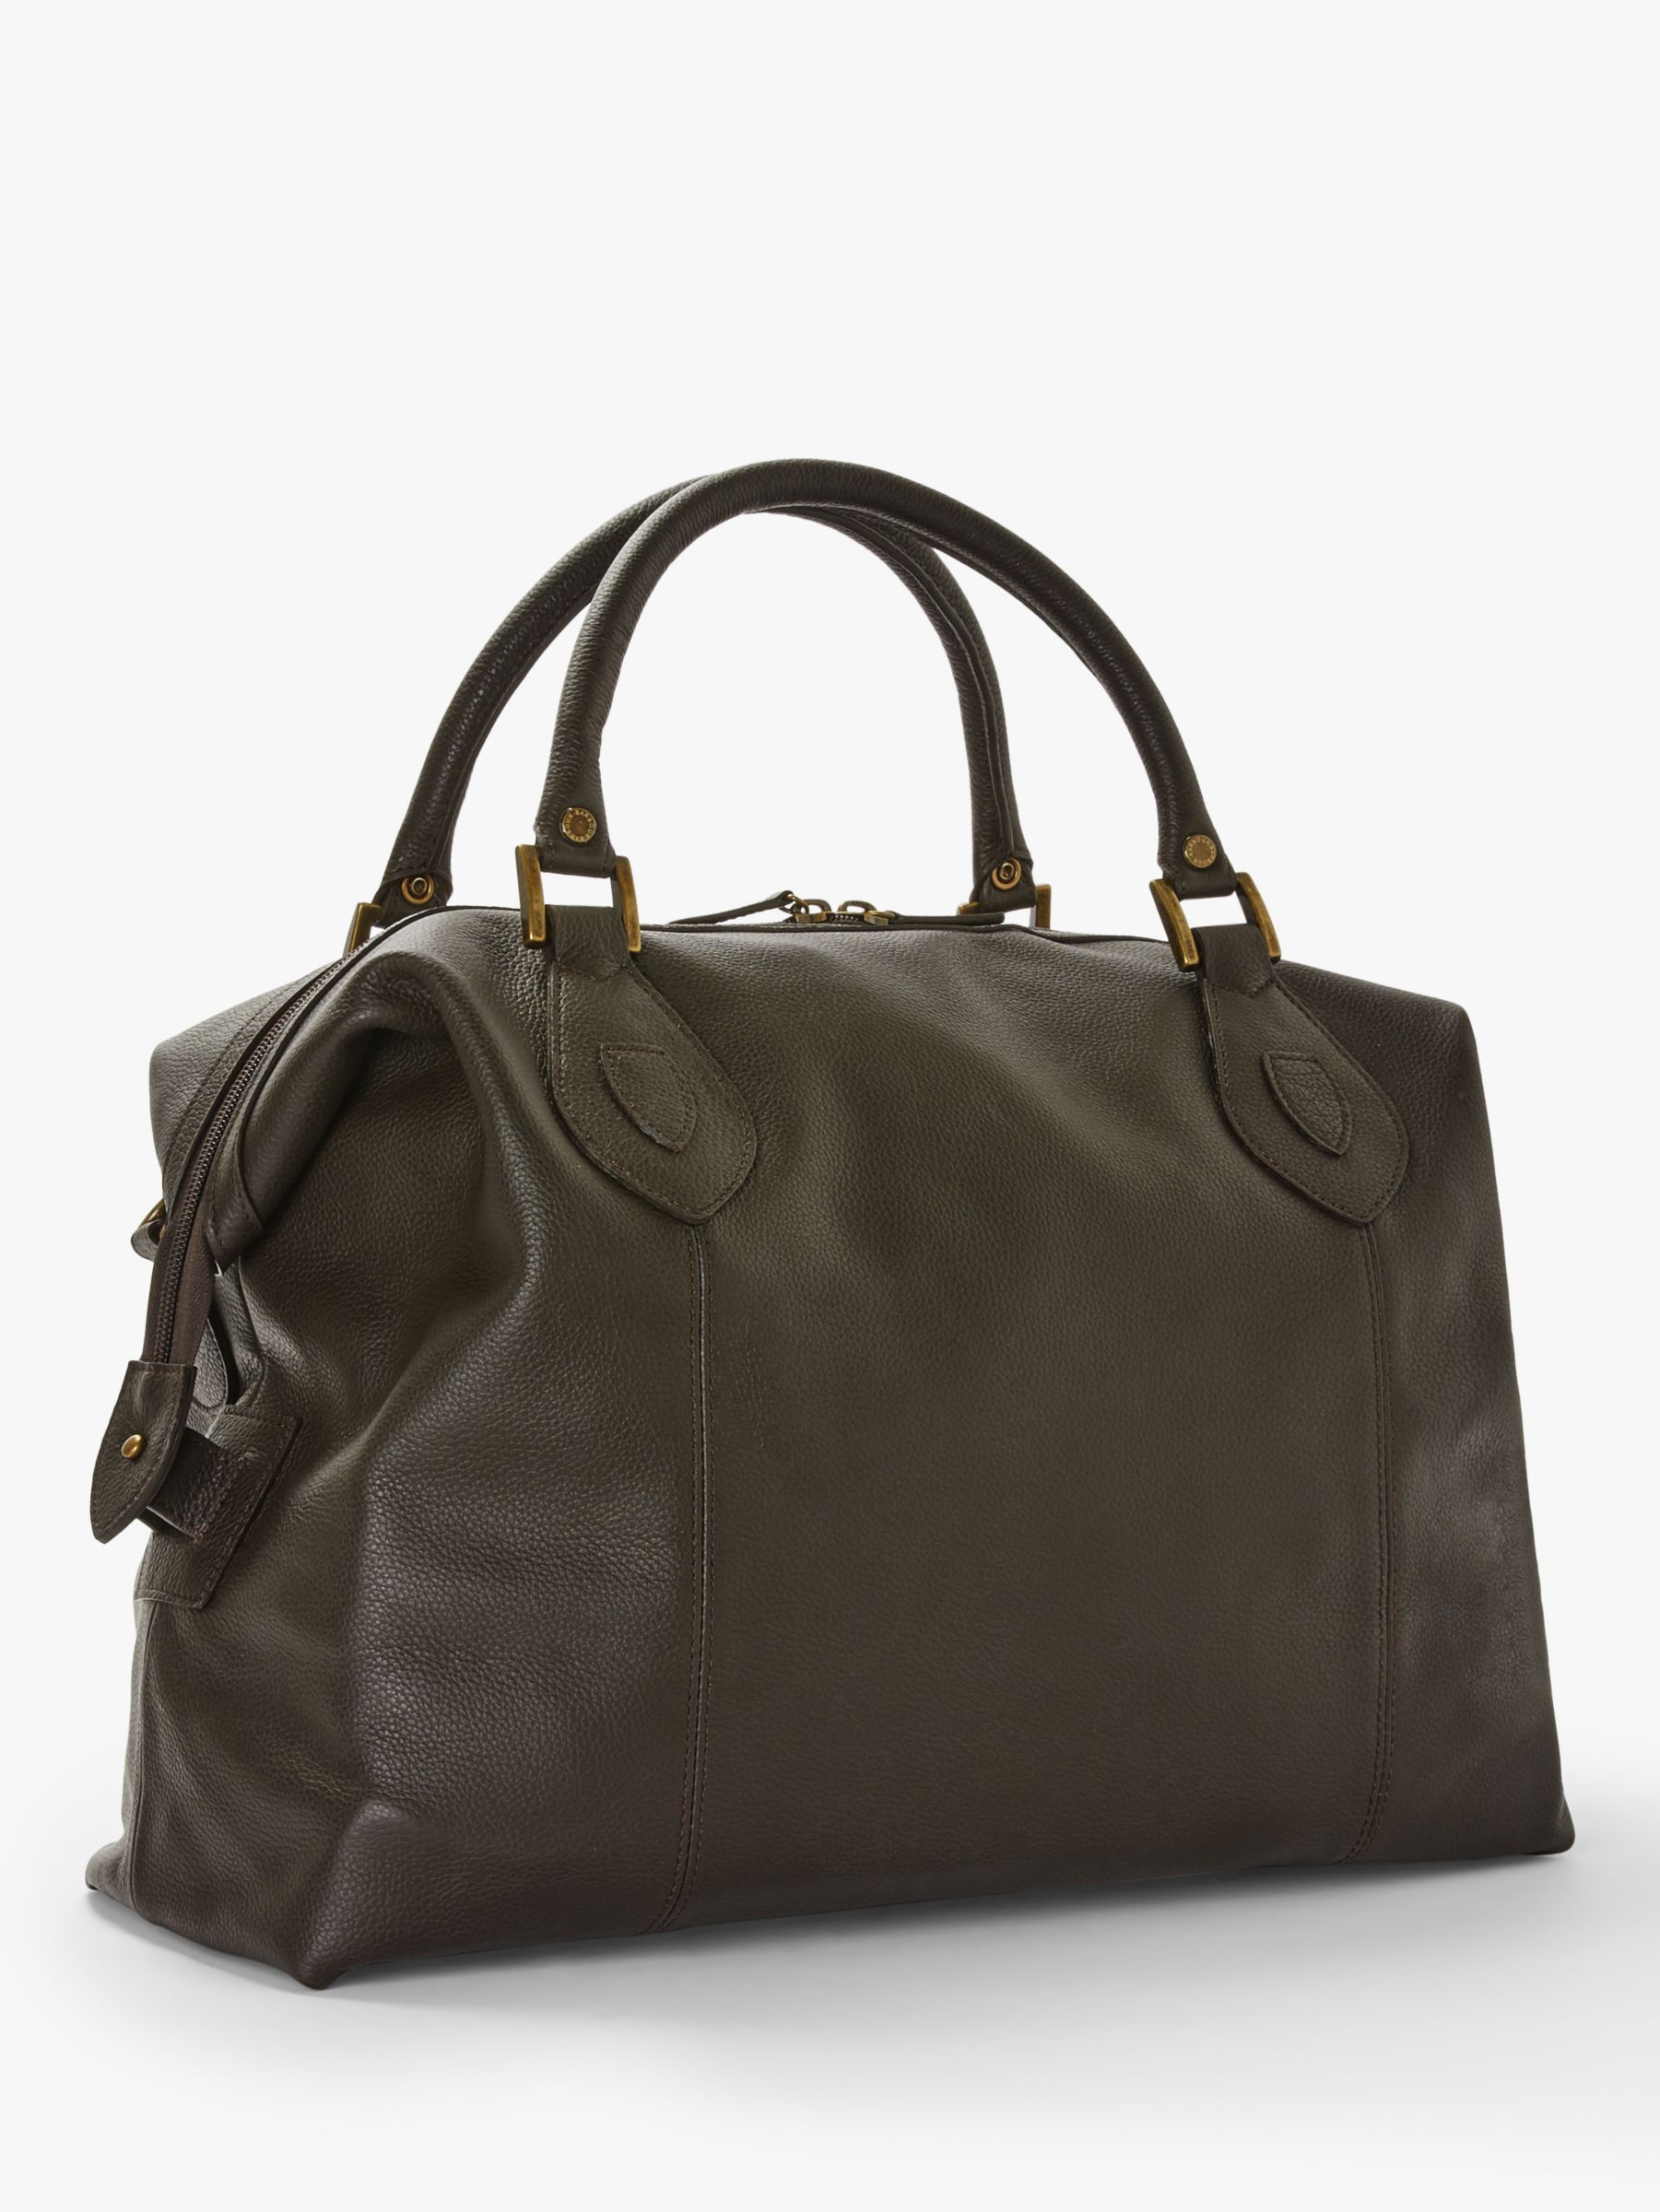 barbour leather weekend bag